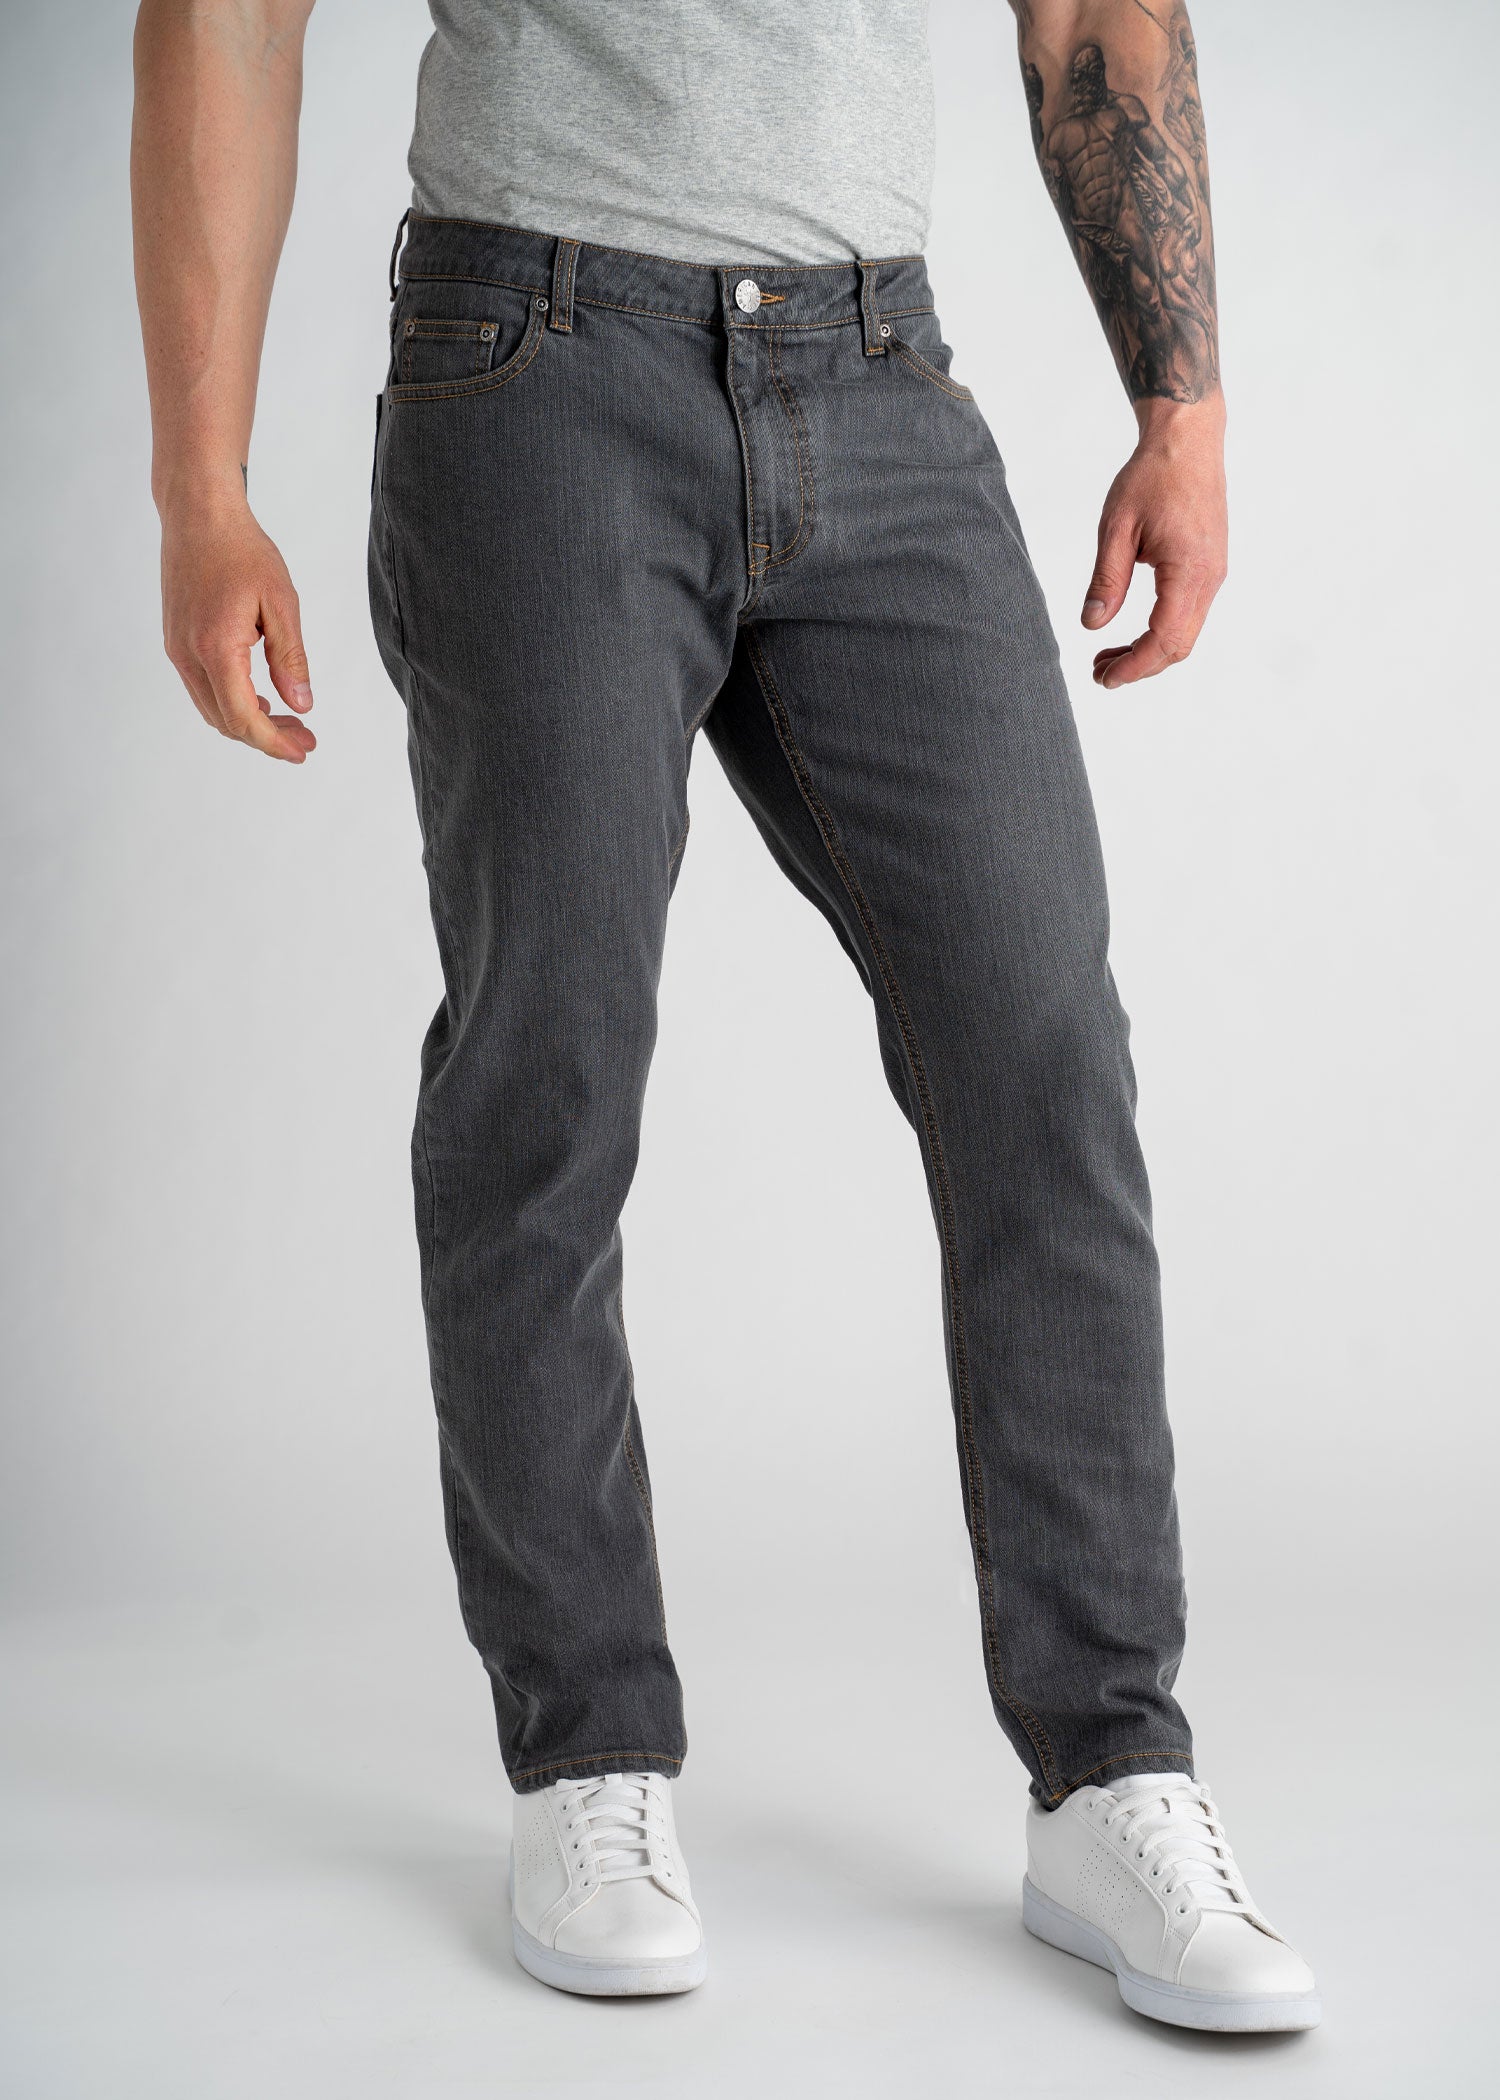 Carman Tapered Jeans For Tall Men Grey